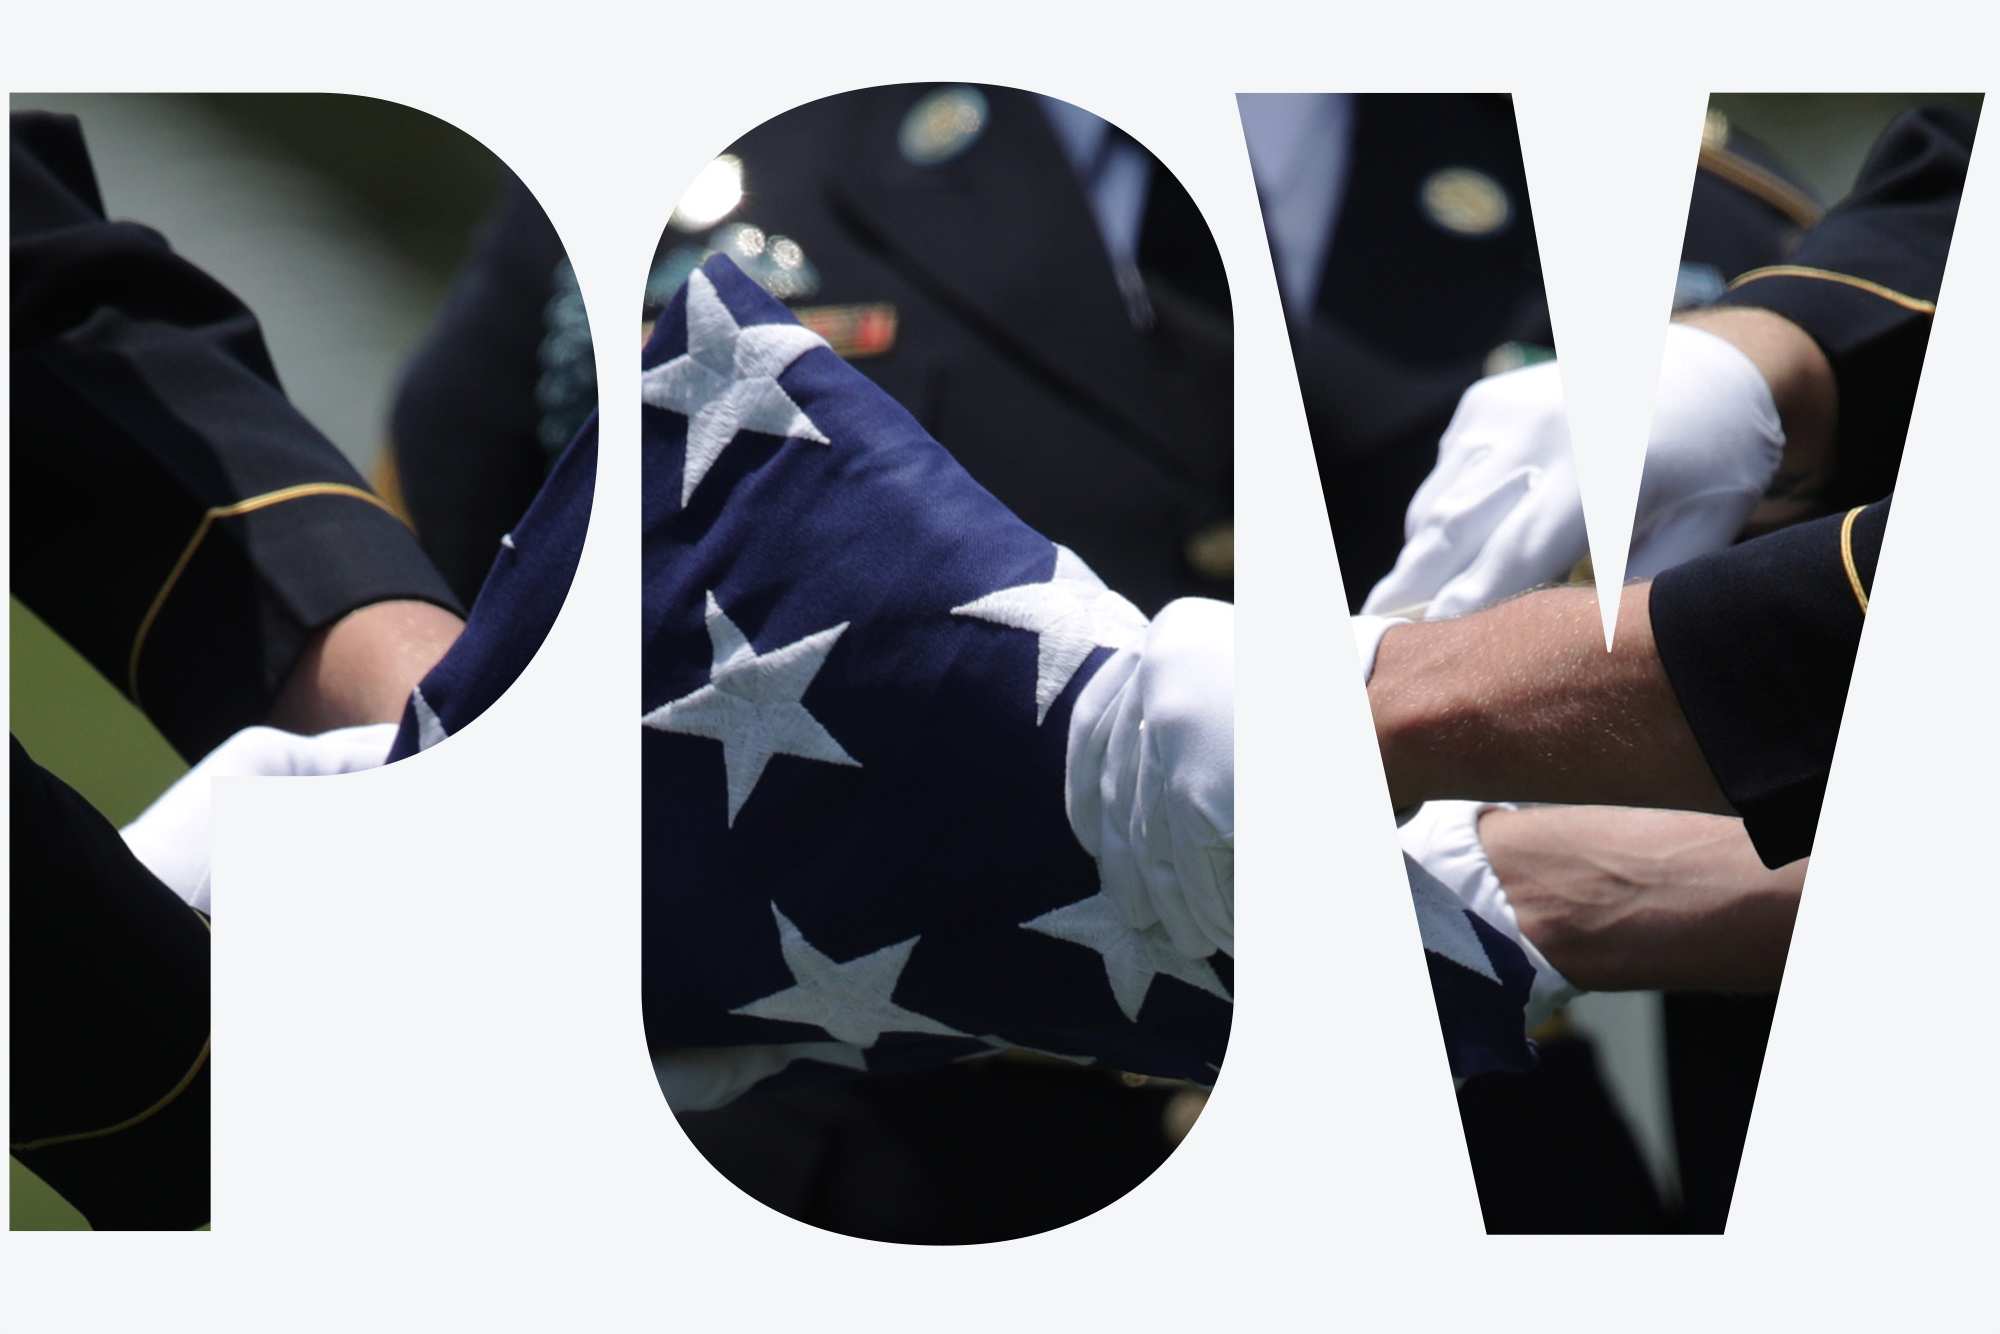 Photo taken in in Arlington, Virginia on June 6, 2019, as members of the U.S. Army’s 3rd Infantry Regiment “The Old Guard” fold a flag during the funeral of World War II Army veteran Carl Mann on the 75th anniversary of the D-Day invasion at Arlington National Cemetery. Soldiers in blue uniforms and white gloves fold an American flag together. Overlay reads "POV"